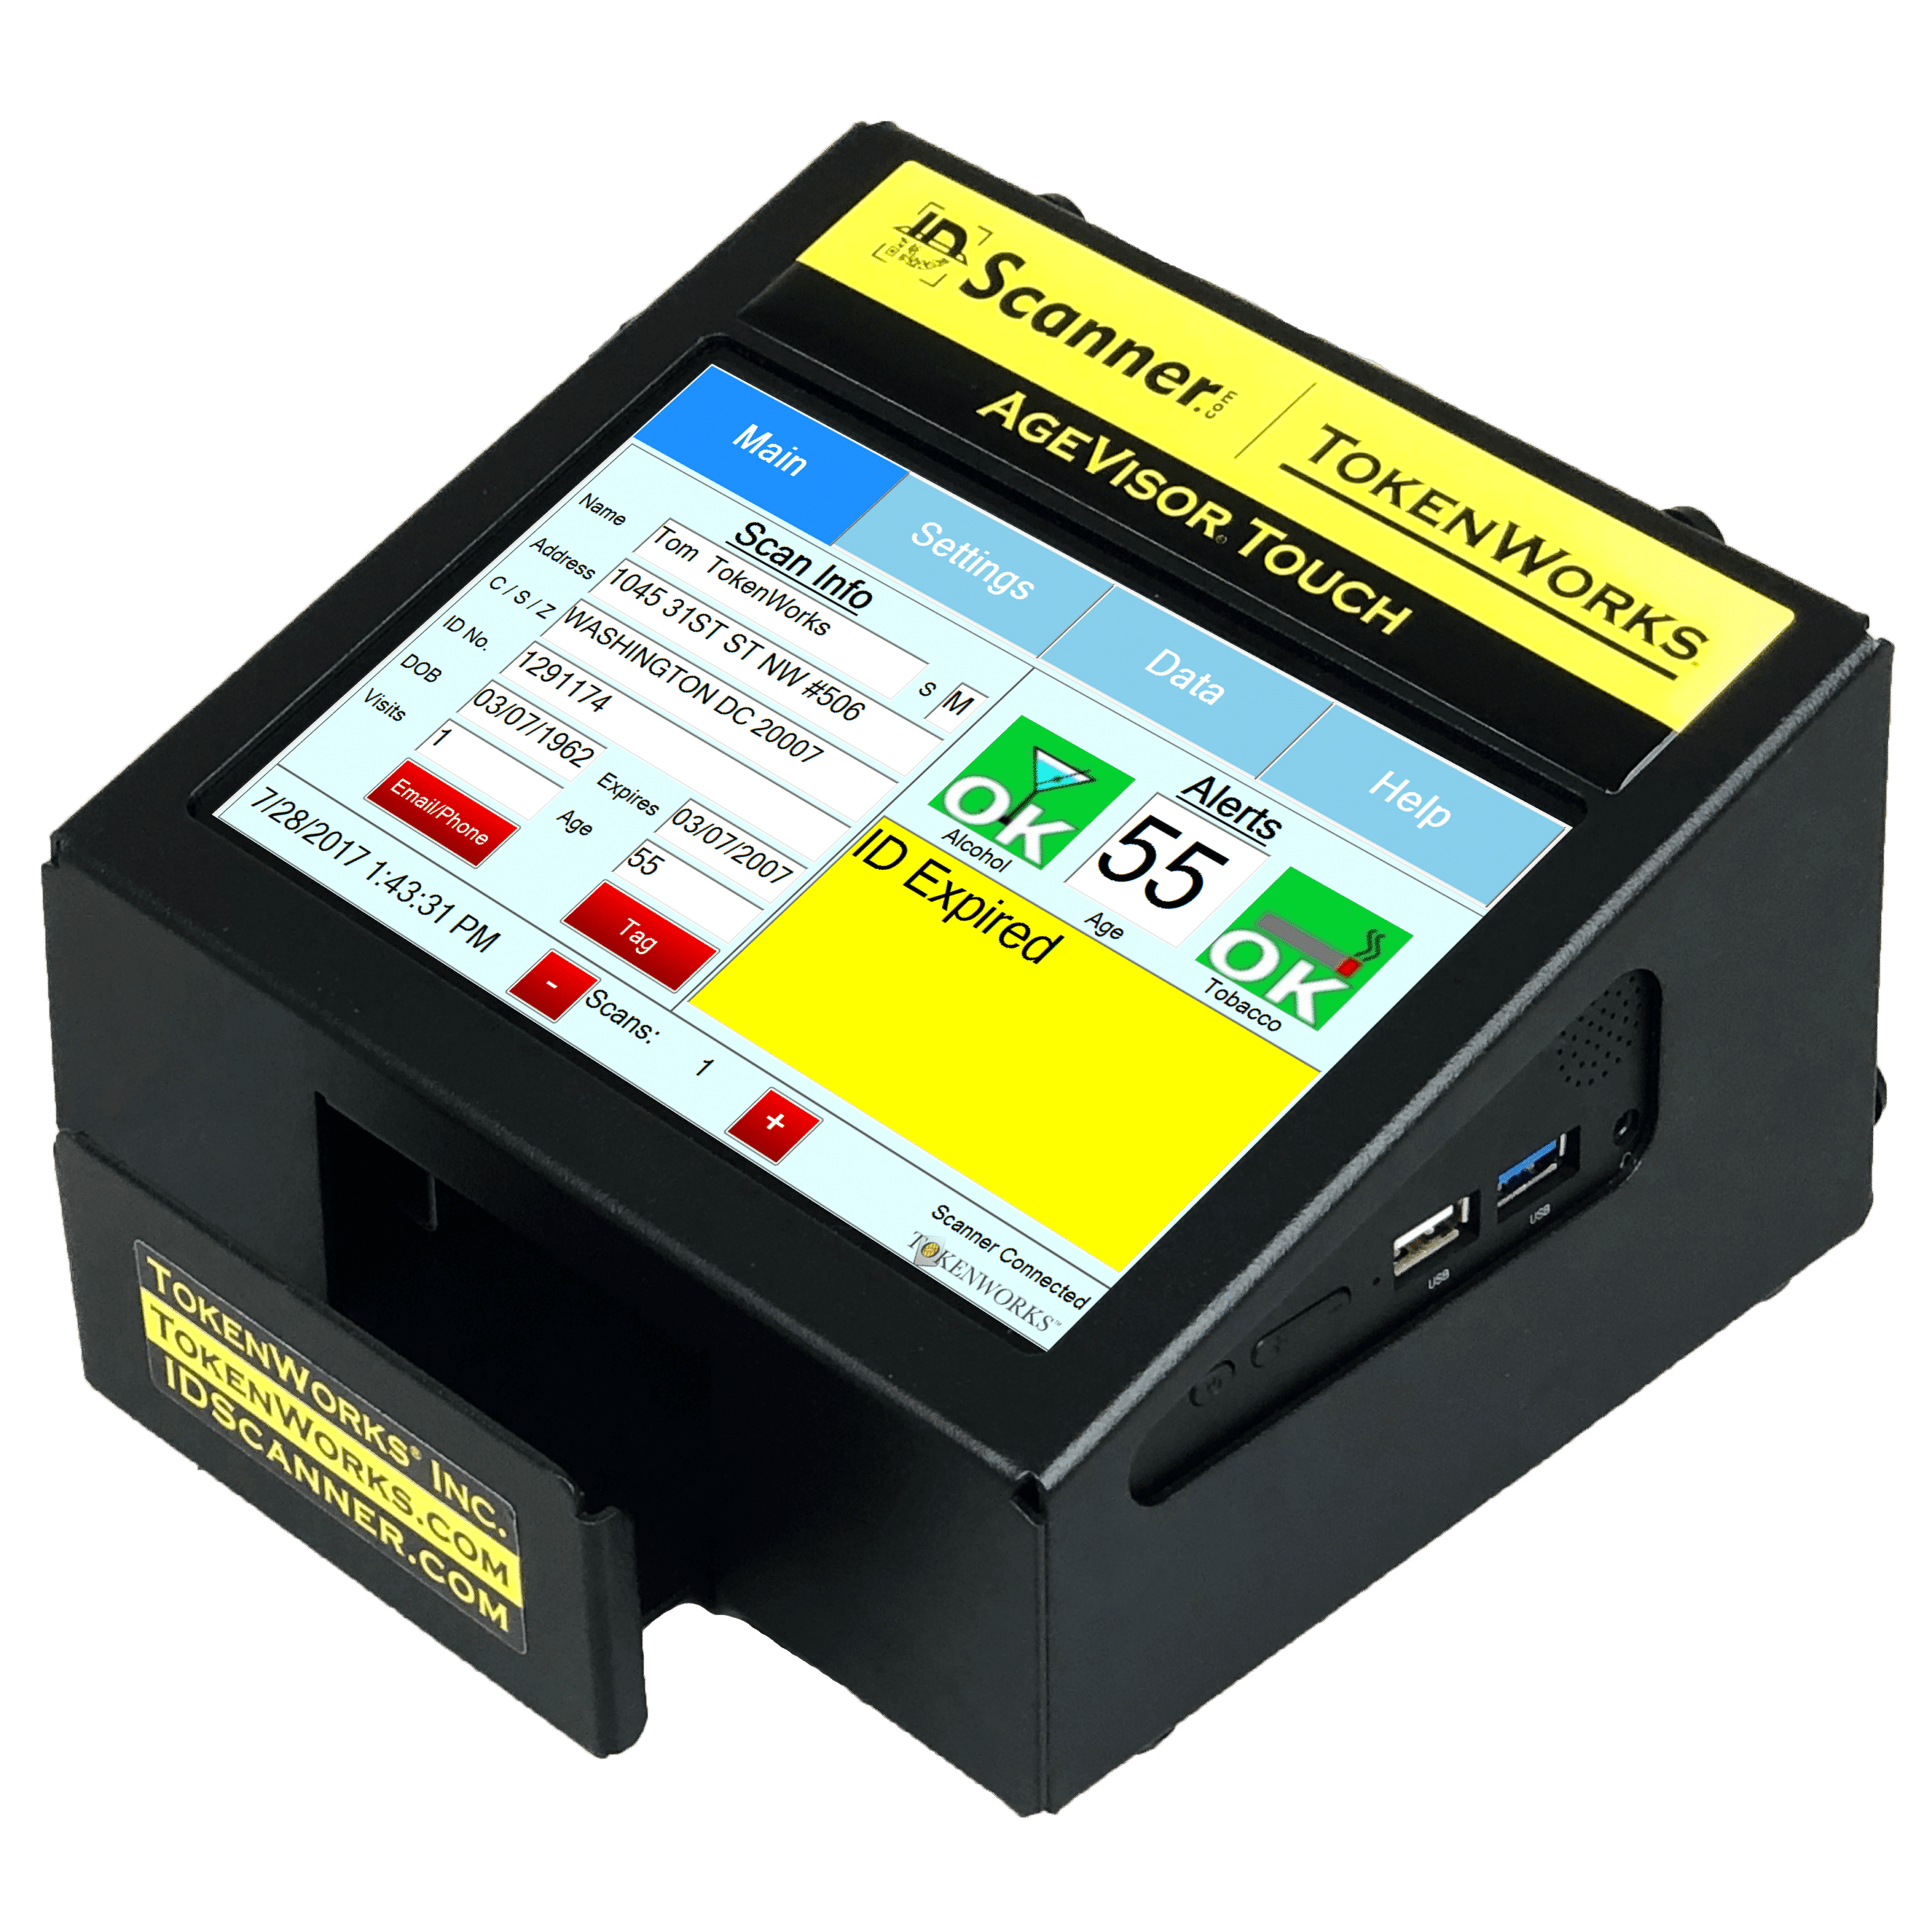 agevisor touch stationary id scanner with data on screen